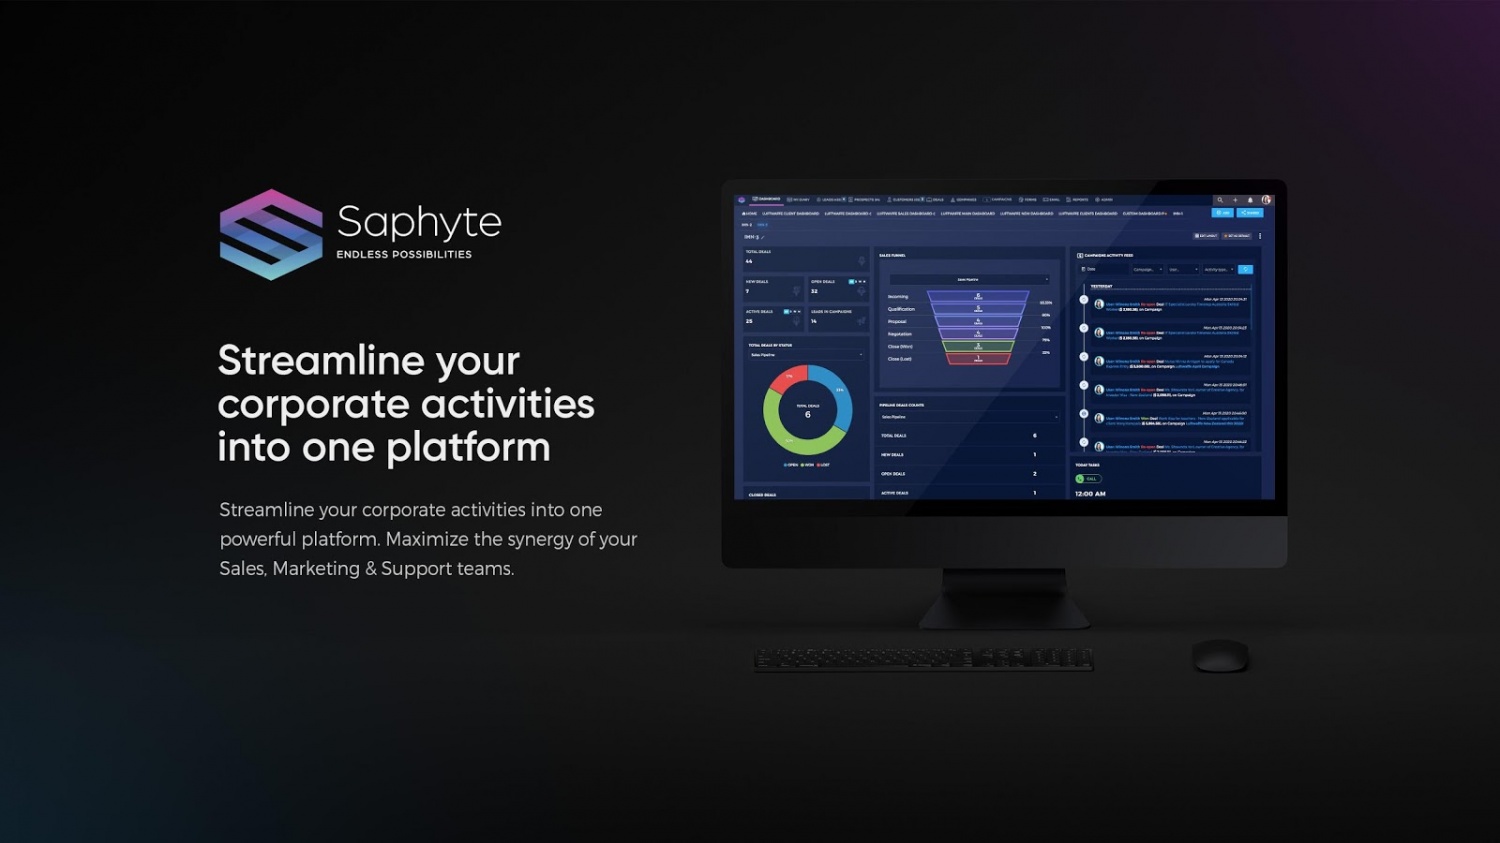 Saphyte: Technology for Automating Business Workflows